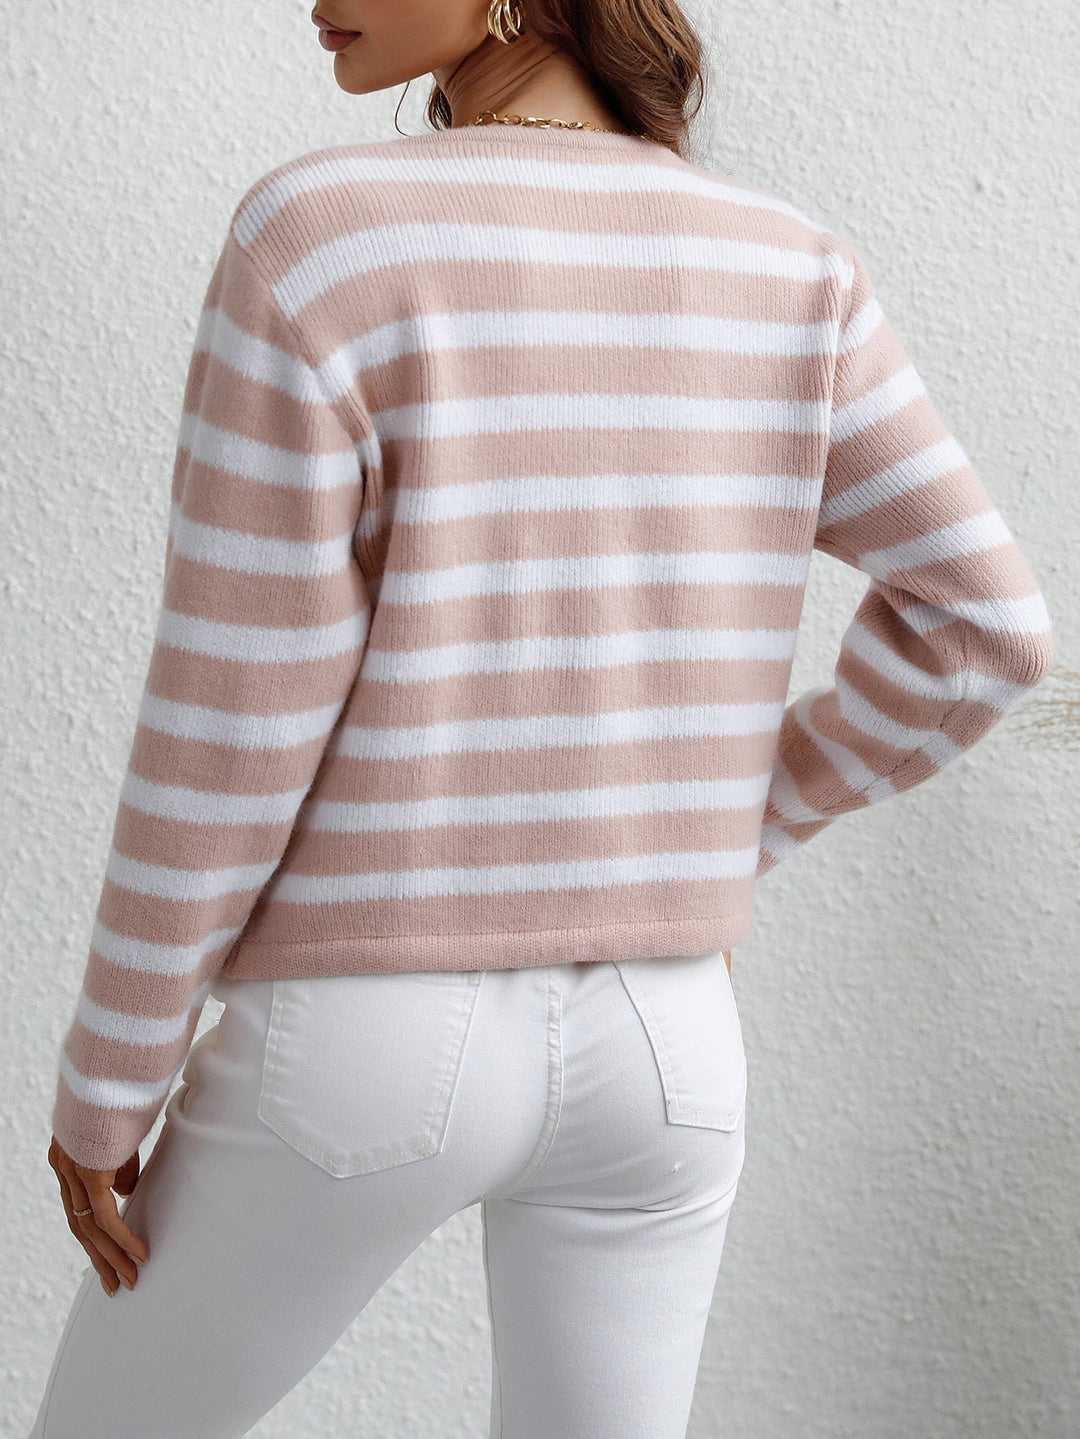 6 Colors - Womens - Autumn / Winter - Striped Loose Single Breasted Cardigan Sweater - Sizes S-XL Ti Amo I love you